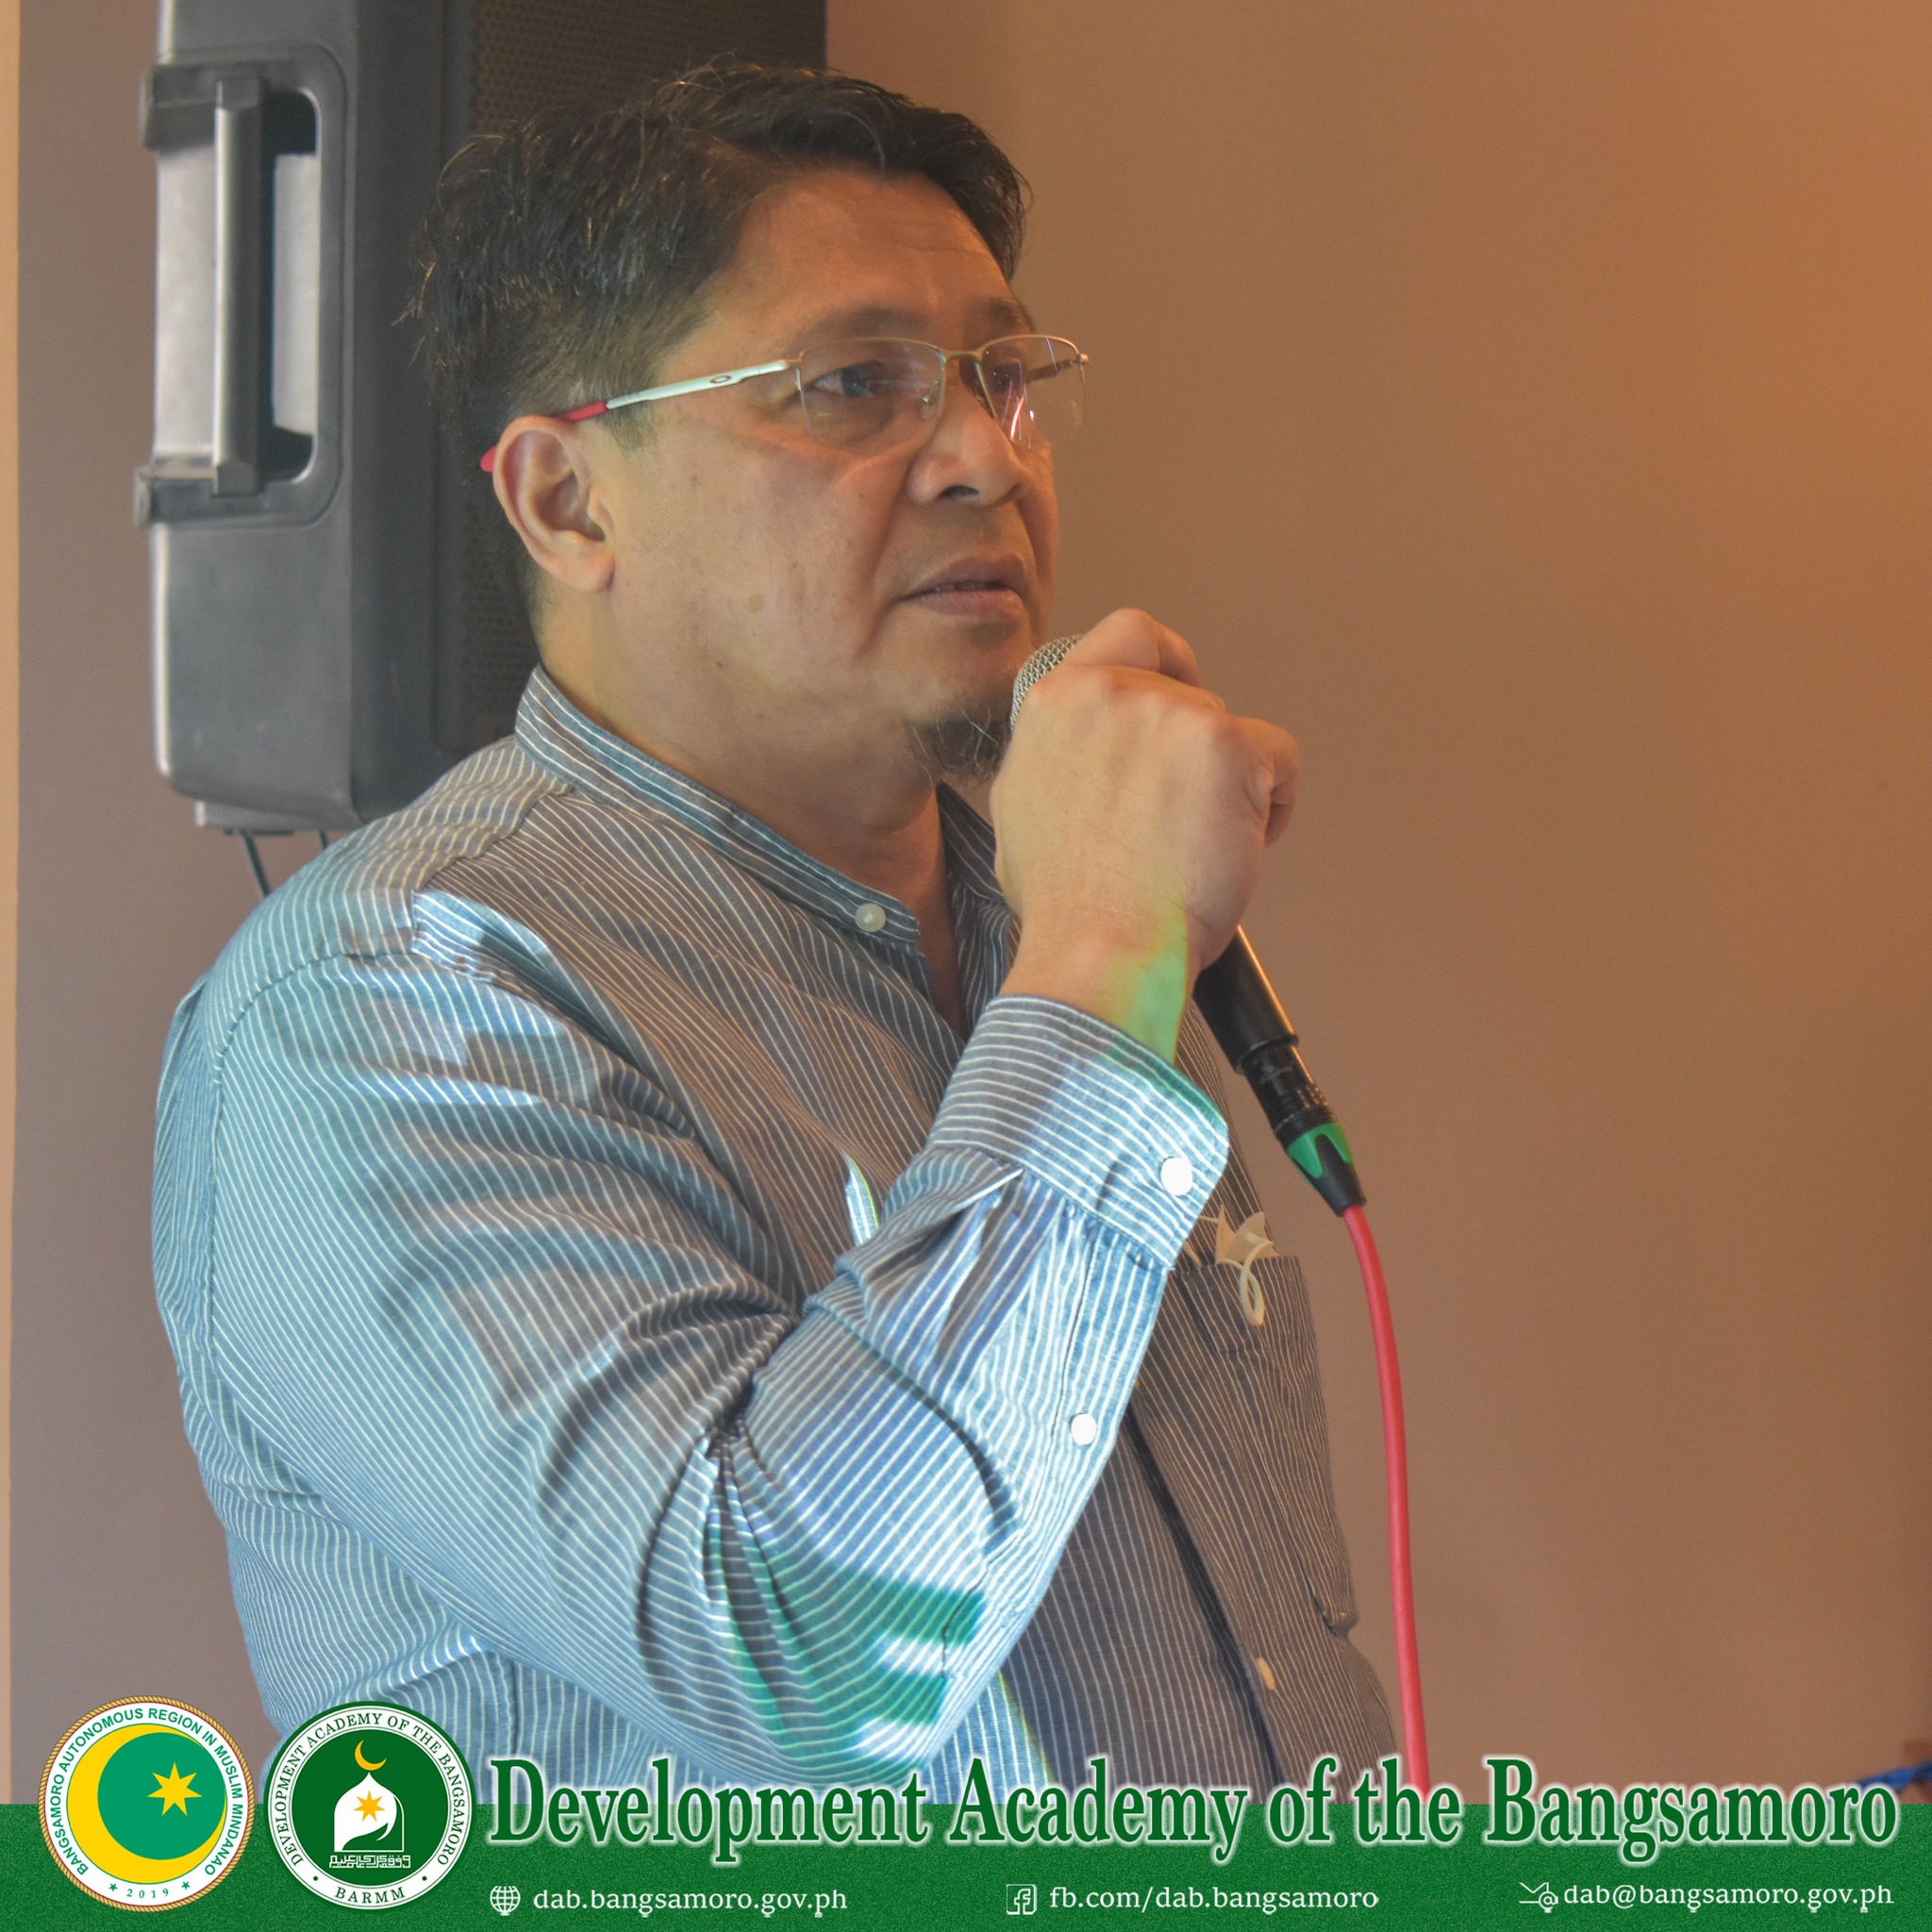 Read more about the article The Office of the Wali of Bangsamoro, in collaboration with the Development Academy of the Bangsamoro, conducted successfully a Training on Completed Staff Work on December 12-14, 2023 at the London Beach Resort in General Santos City. The three-day